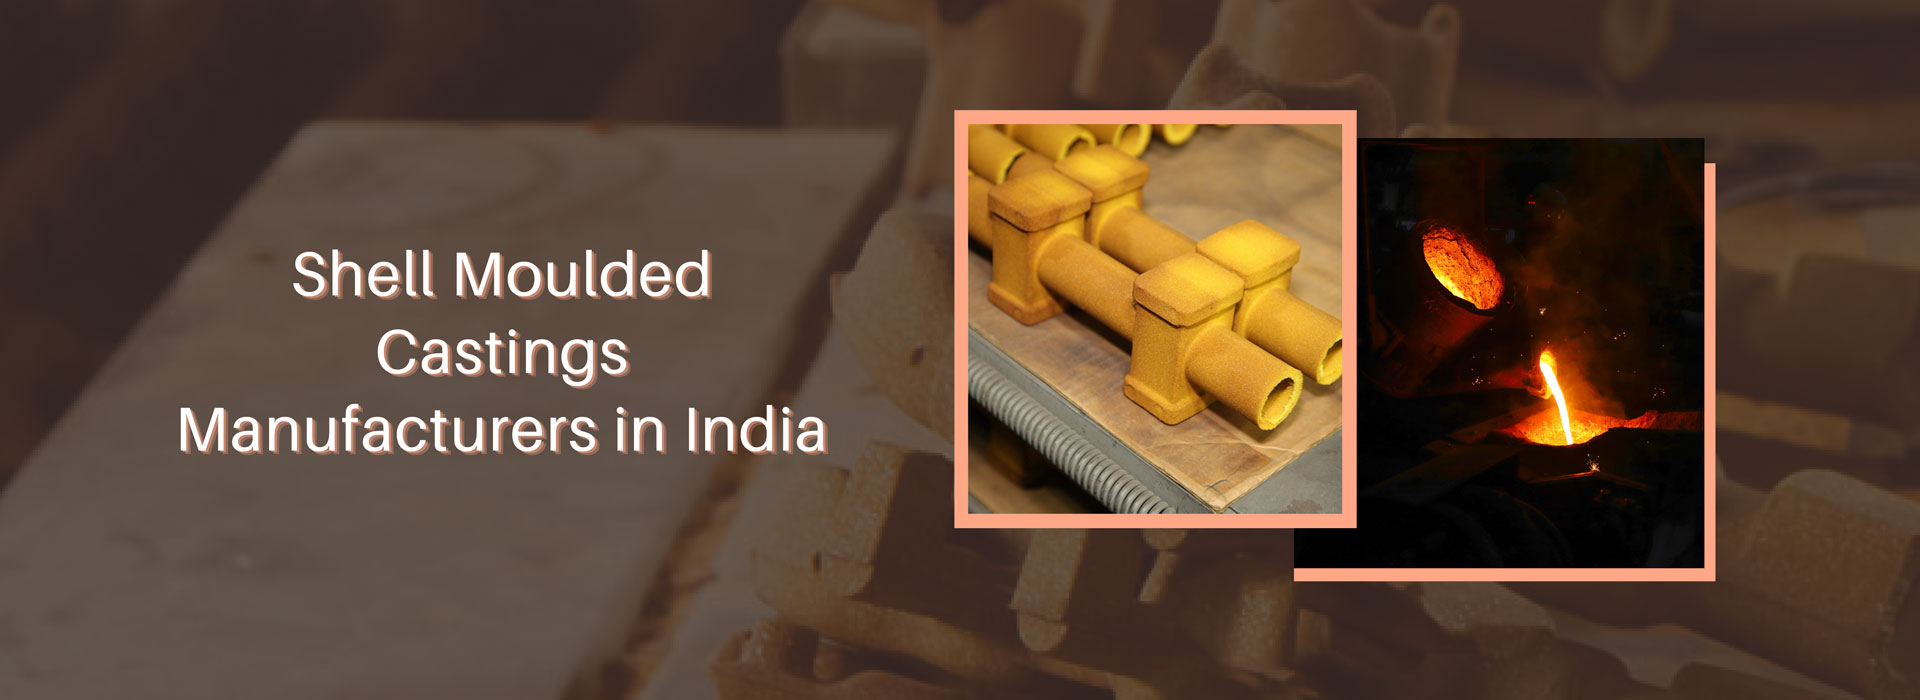 Manufacturer of Resin Coated Sand or Precoated Sand | Shell Moulded Castings Manufacturer in India